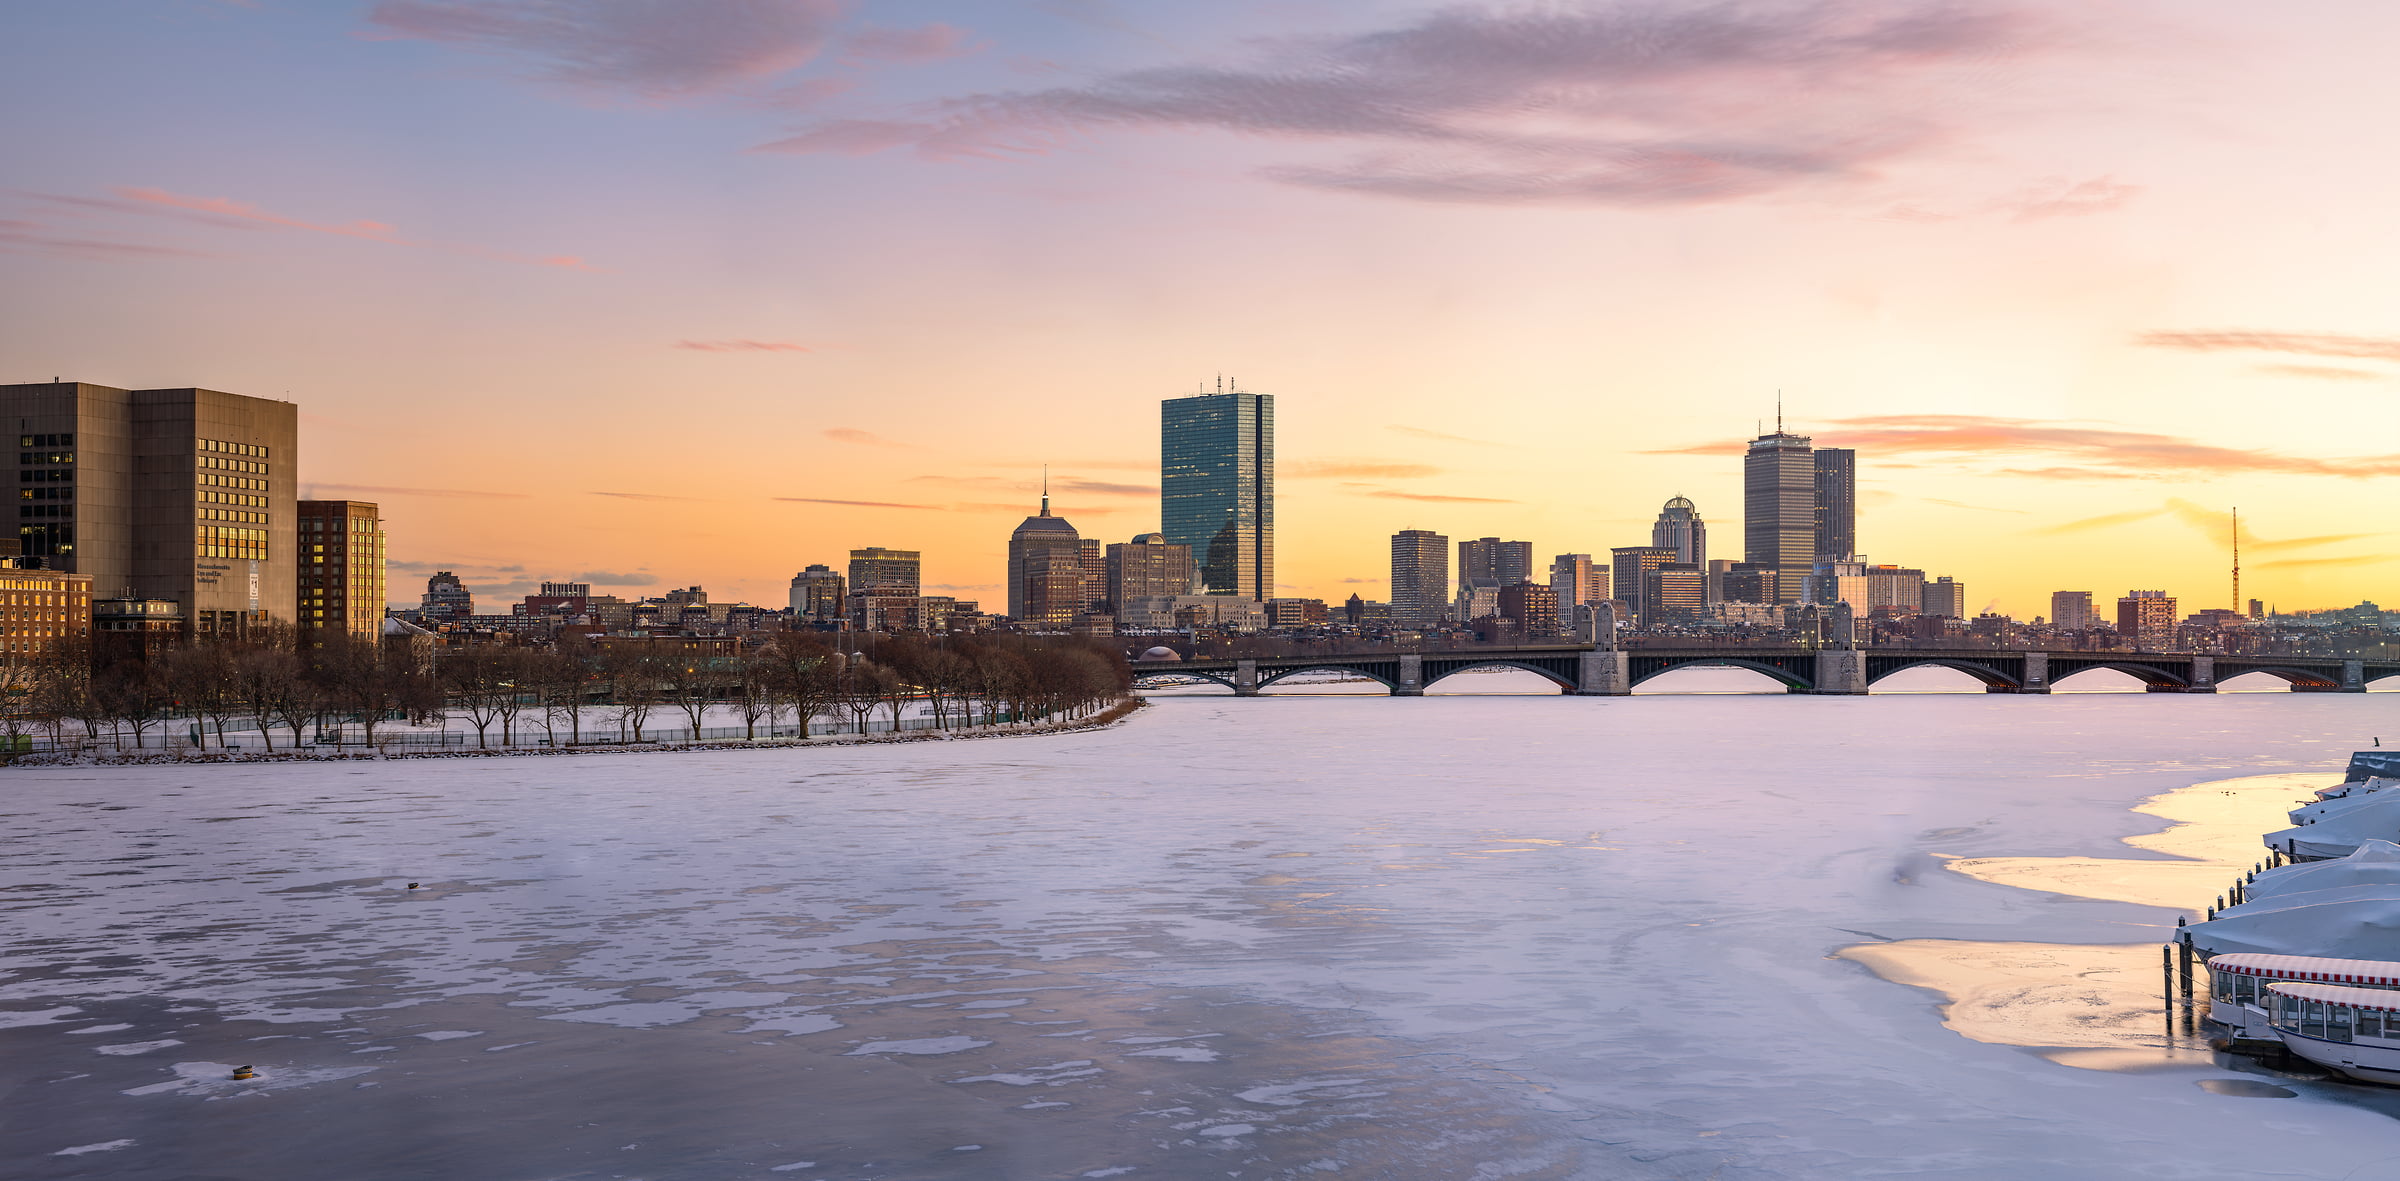 1,159 megapixels! A very high resolution, large-format VAST photo print of the Boston skyline at sunset in winter with the Charles River frozen; cityscape photograph created by Chris Blake in Boston, Massachusetts